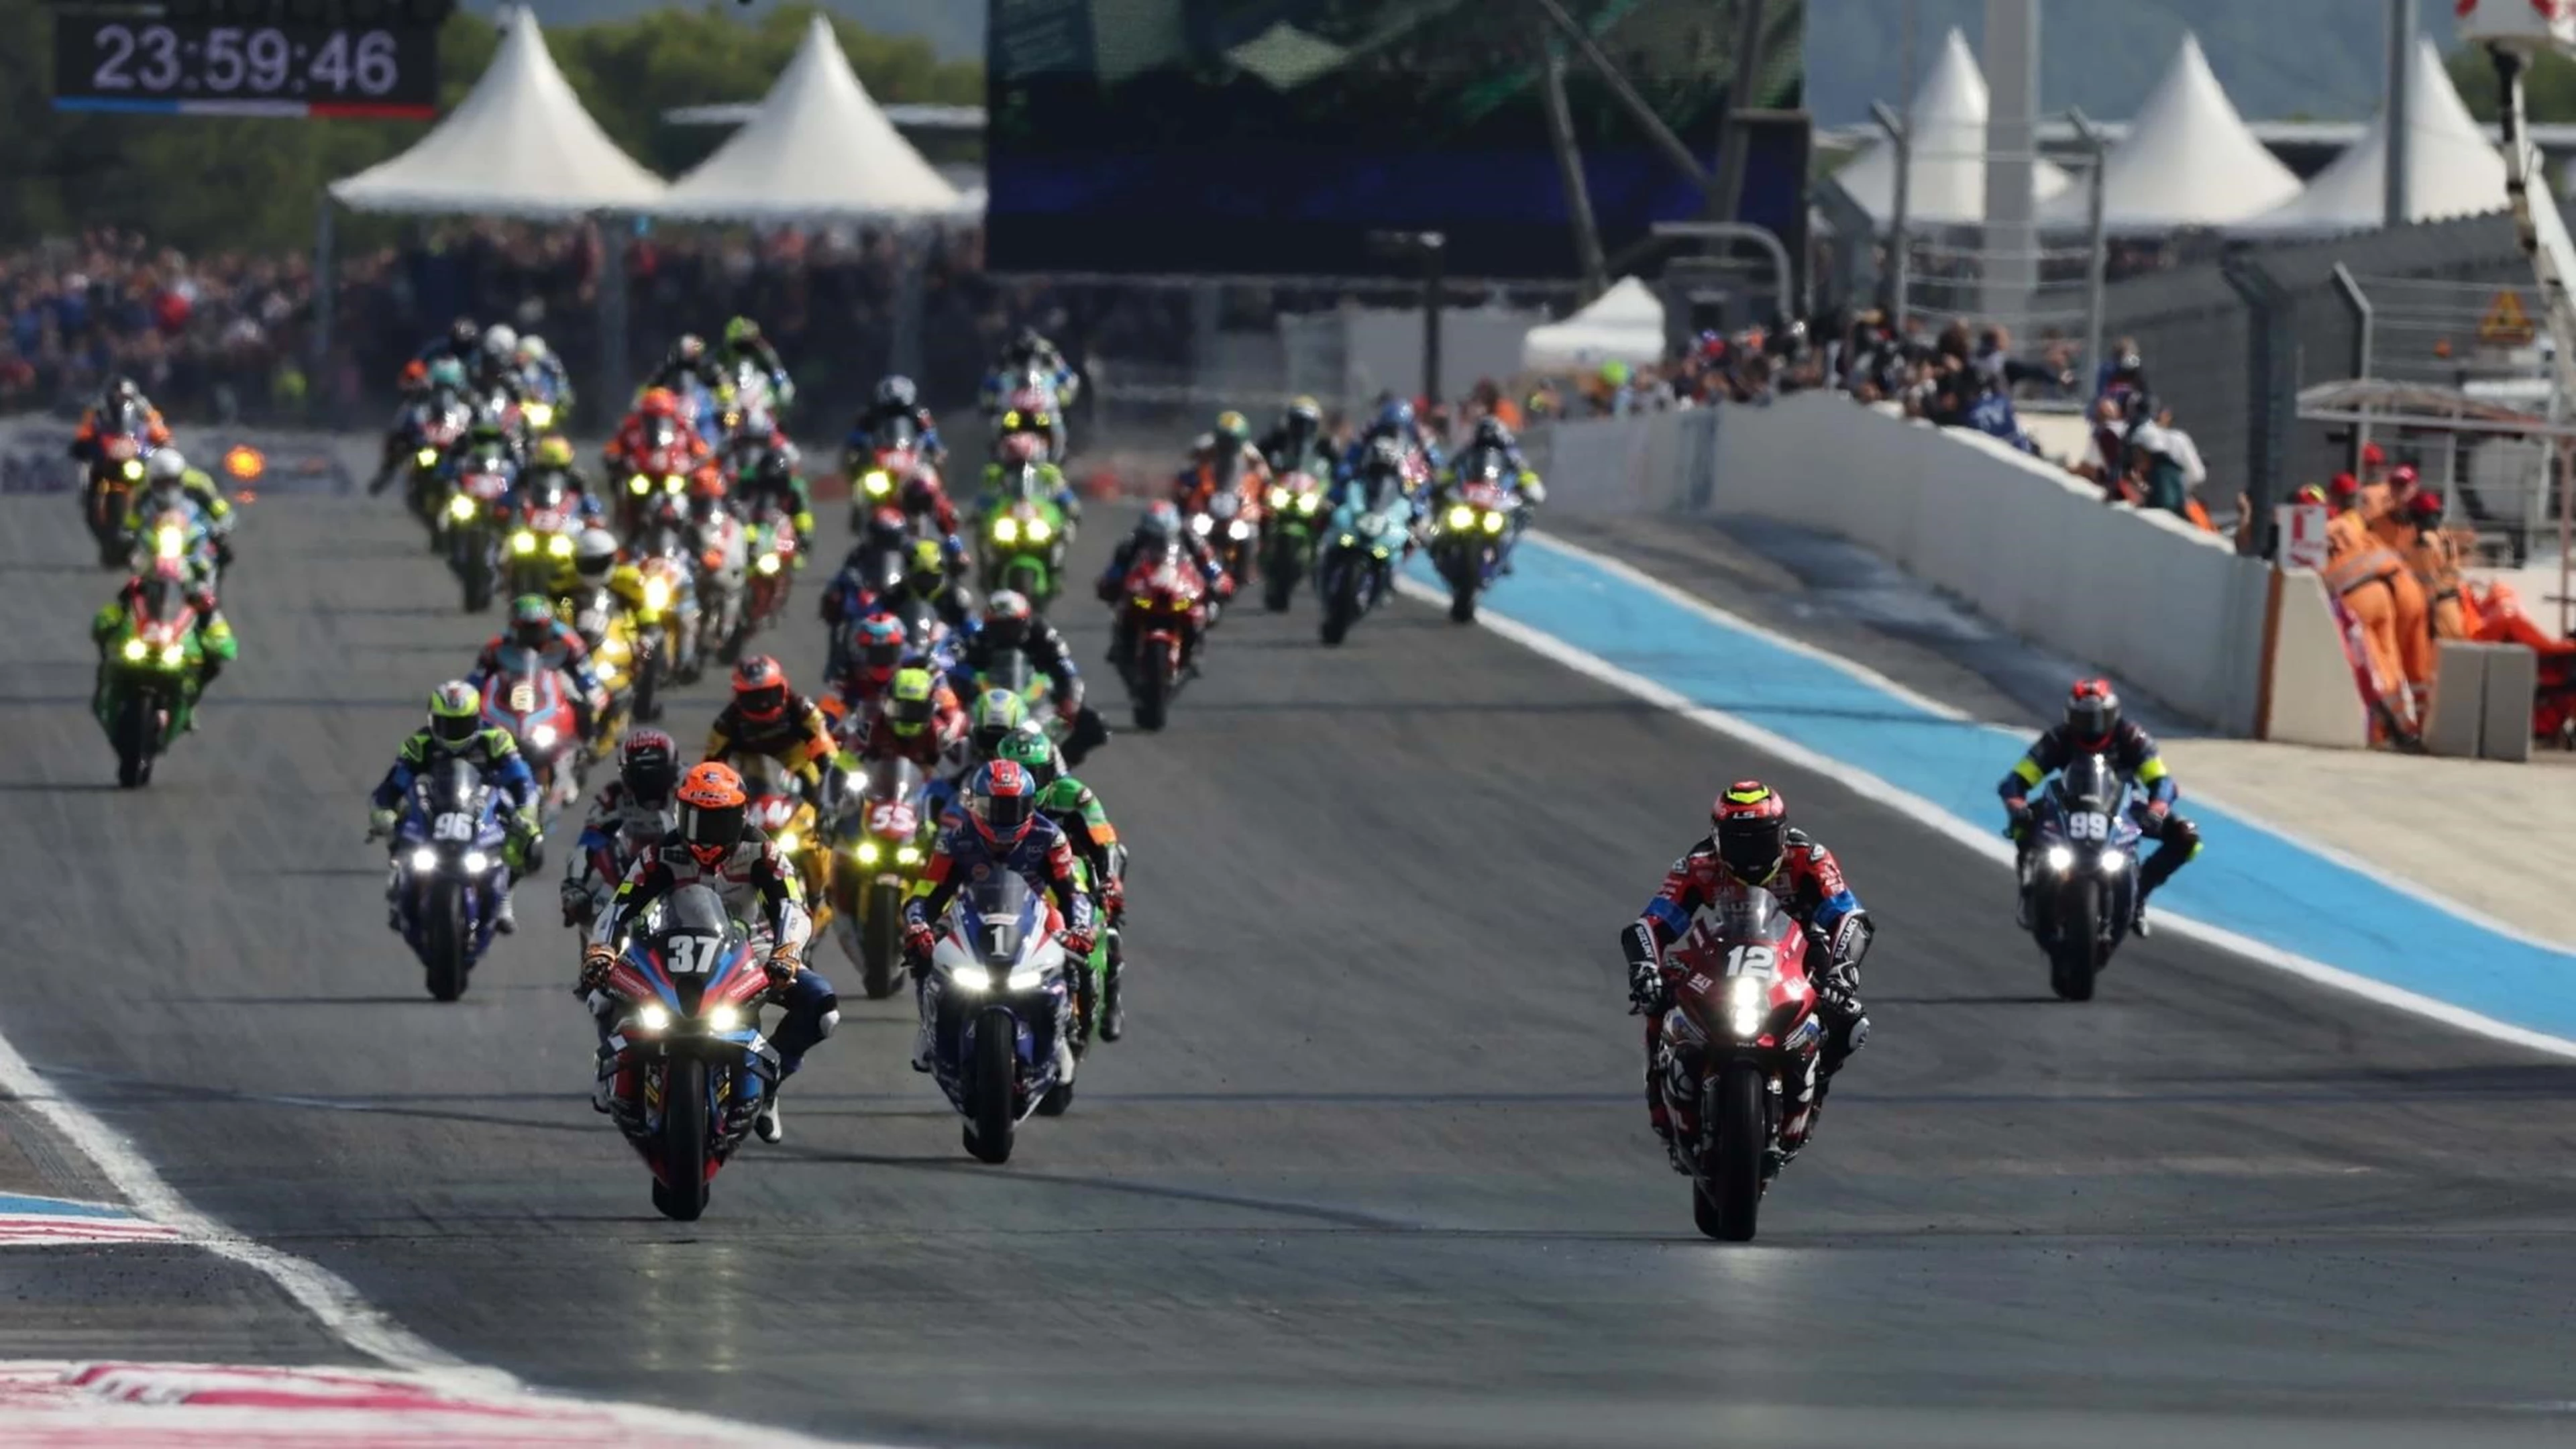 Motorcycles racing on track